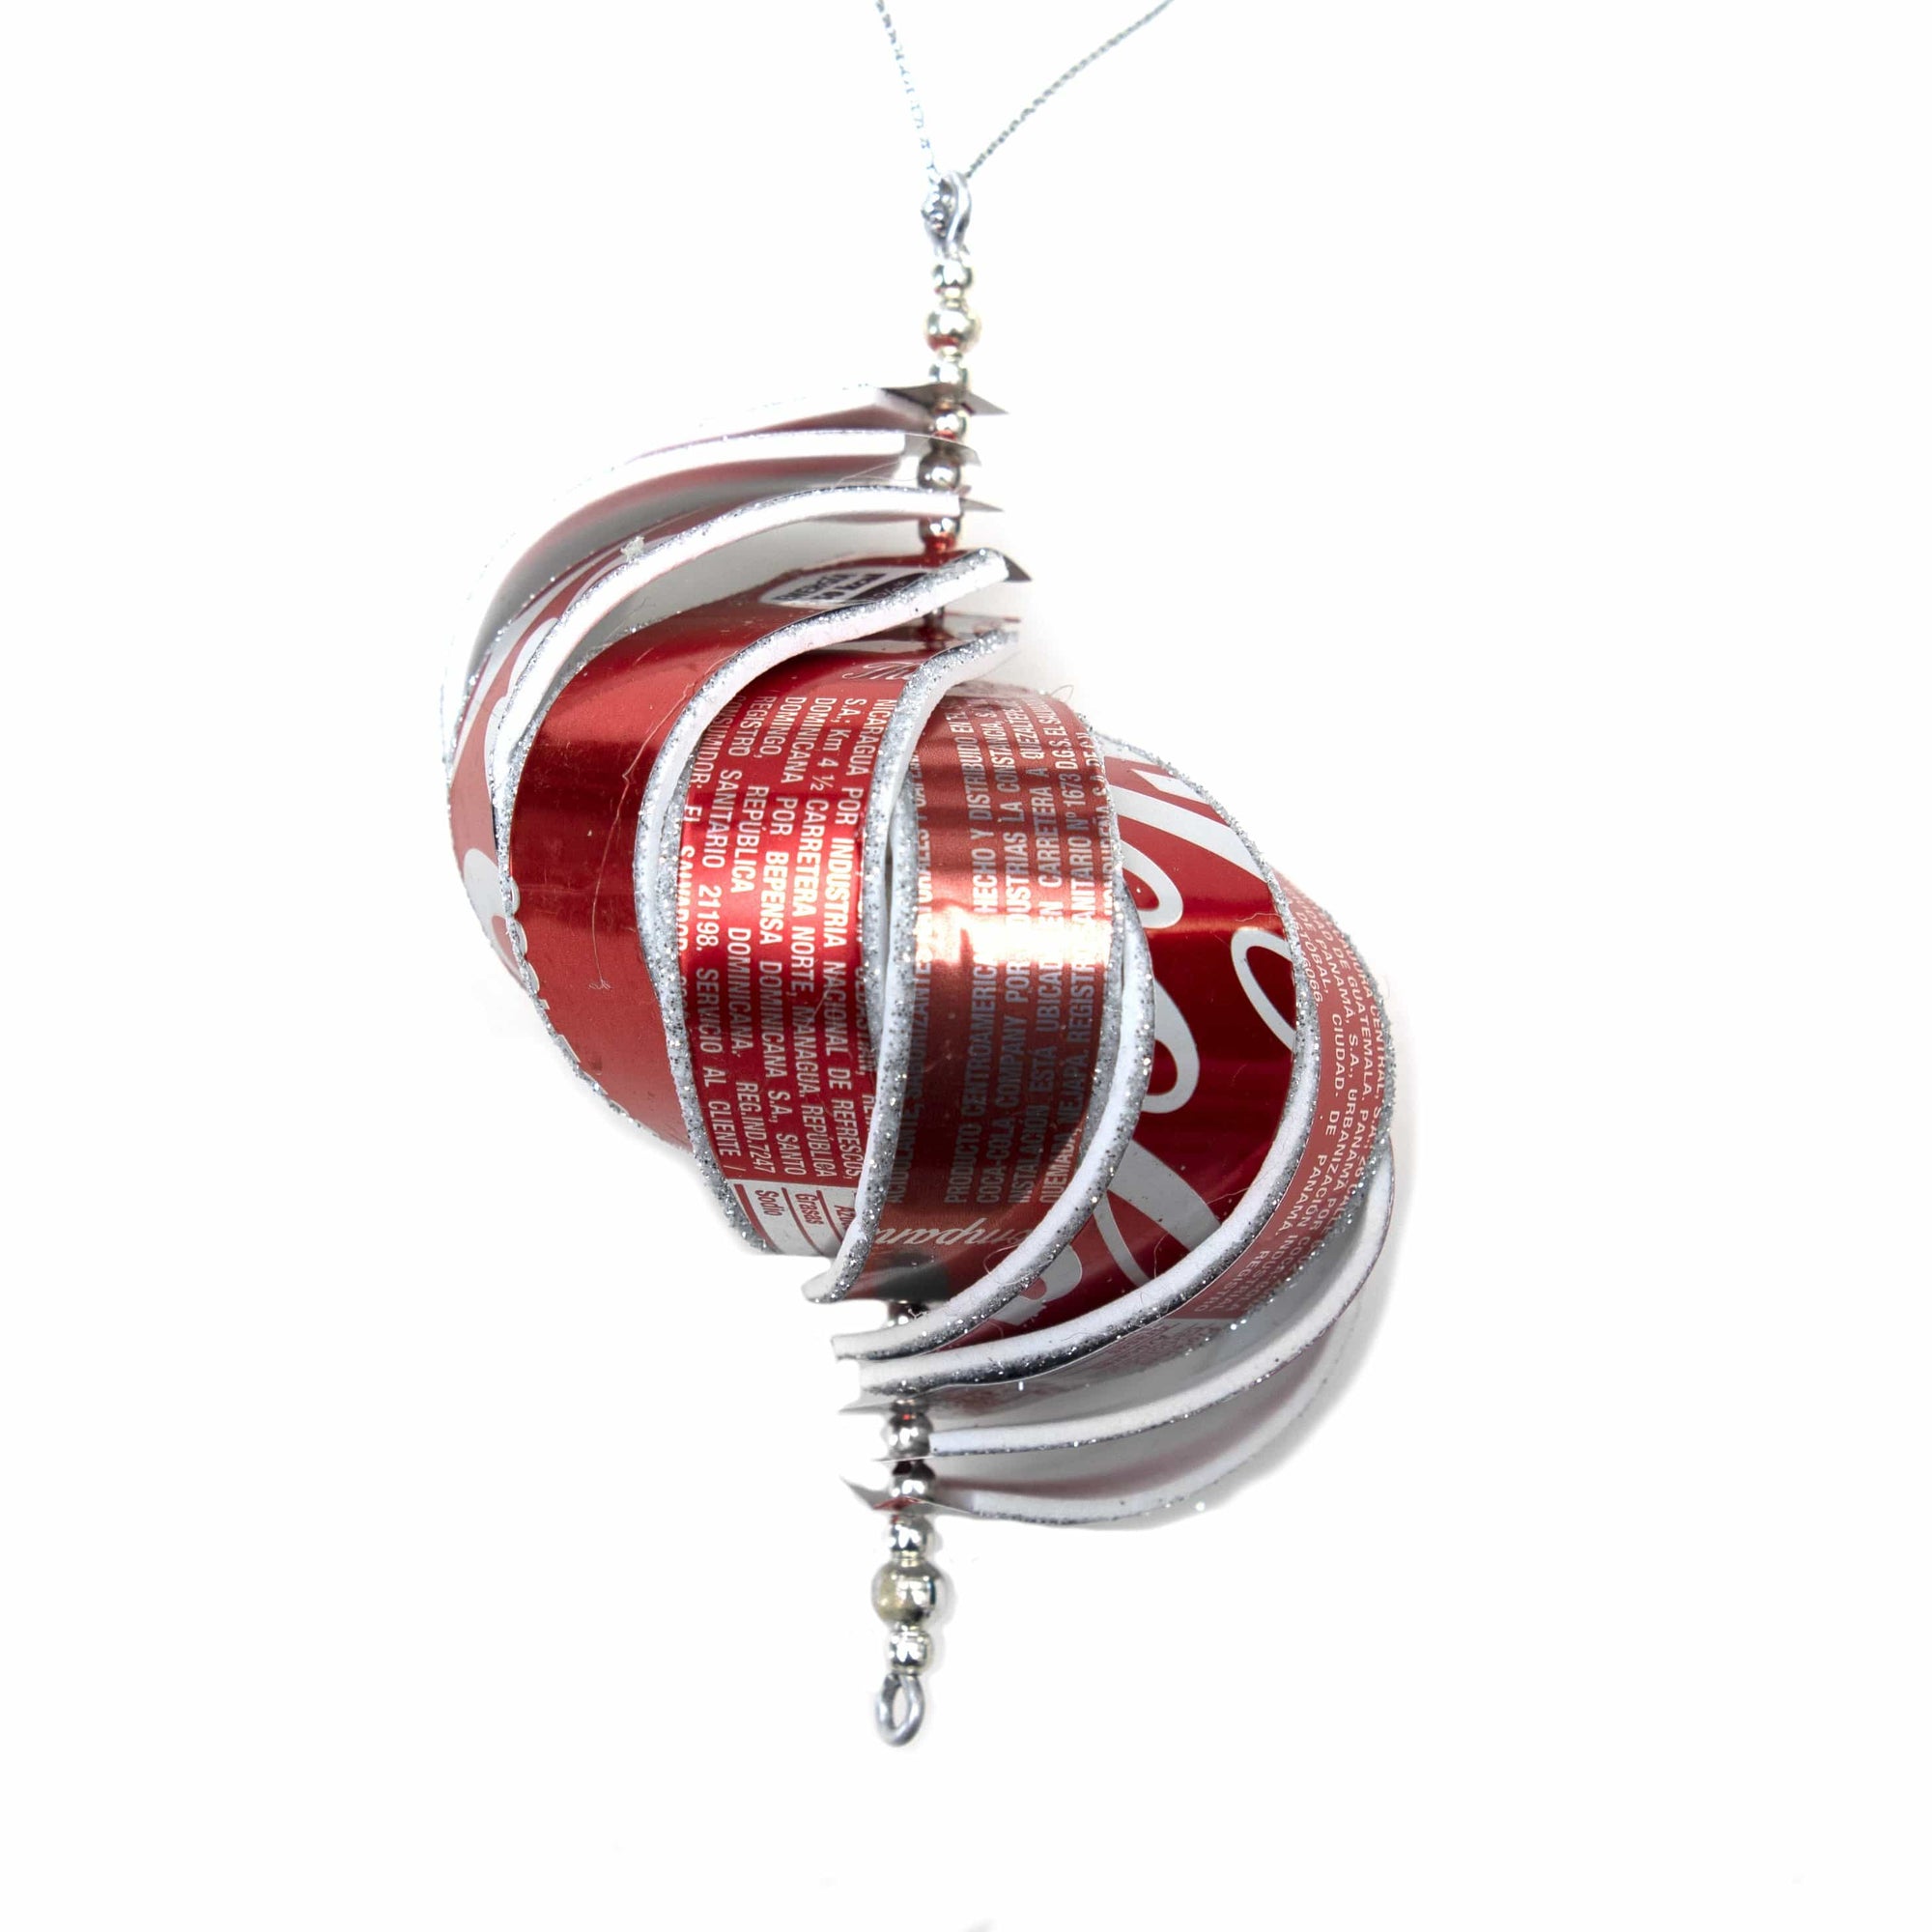 Recycled Spiral Ornament Made from Coke Cans